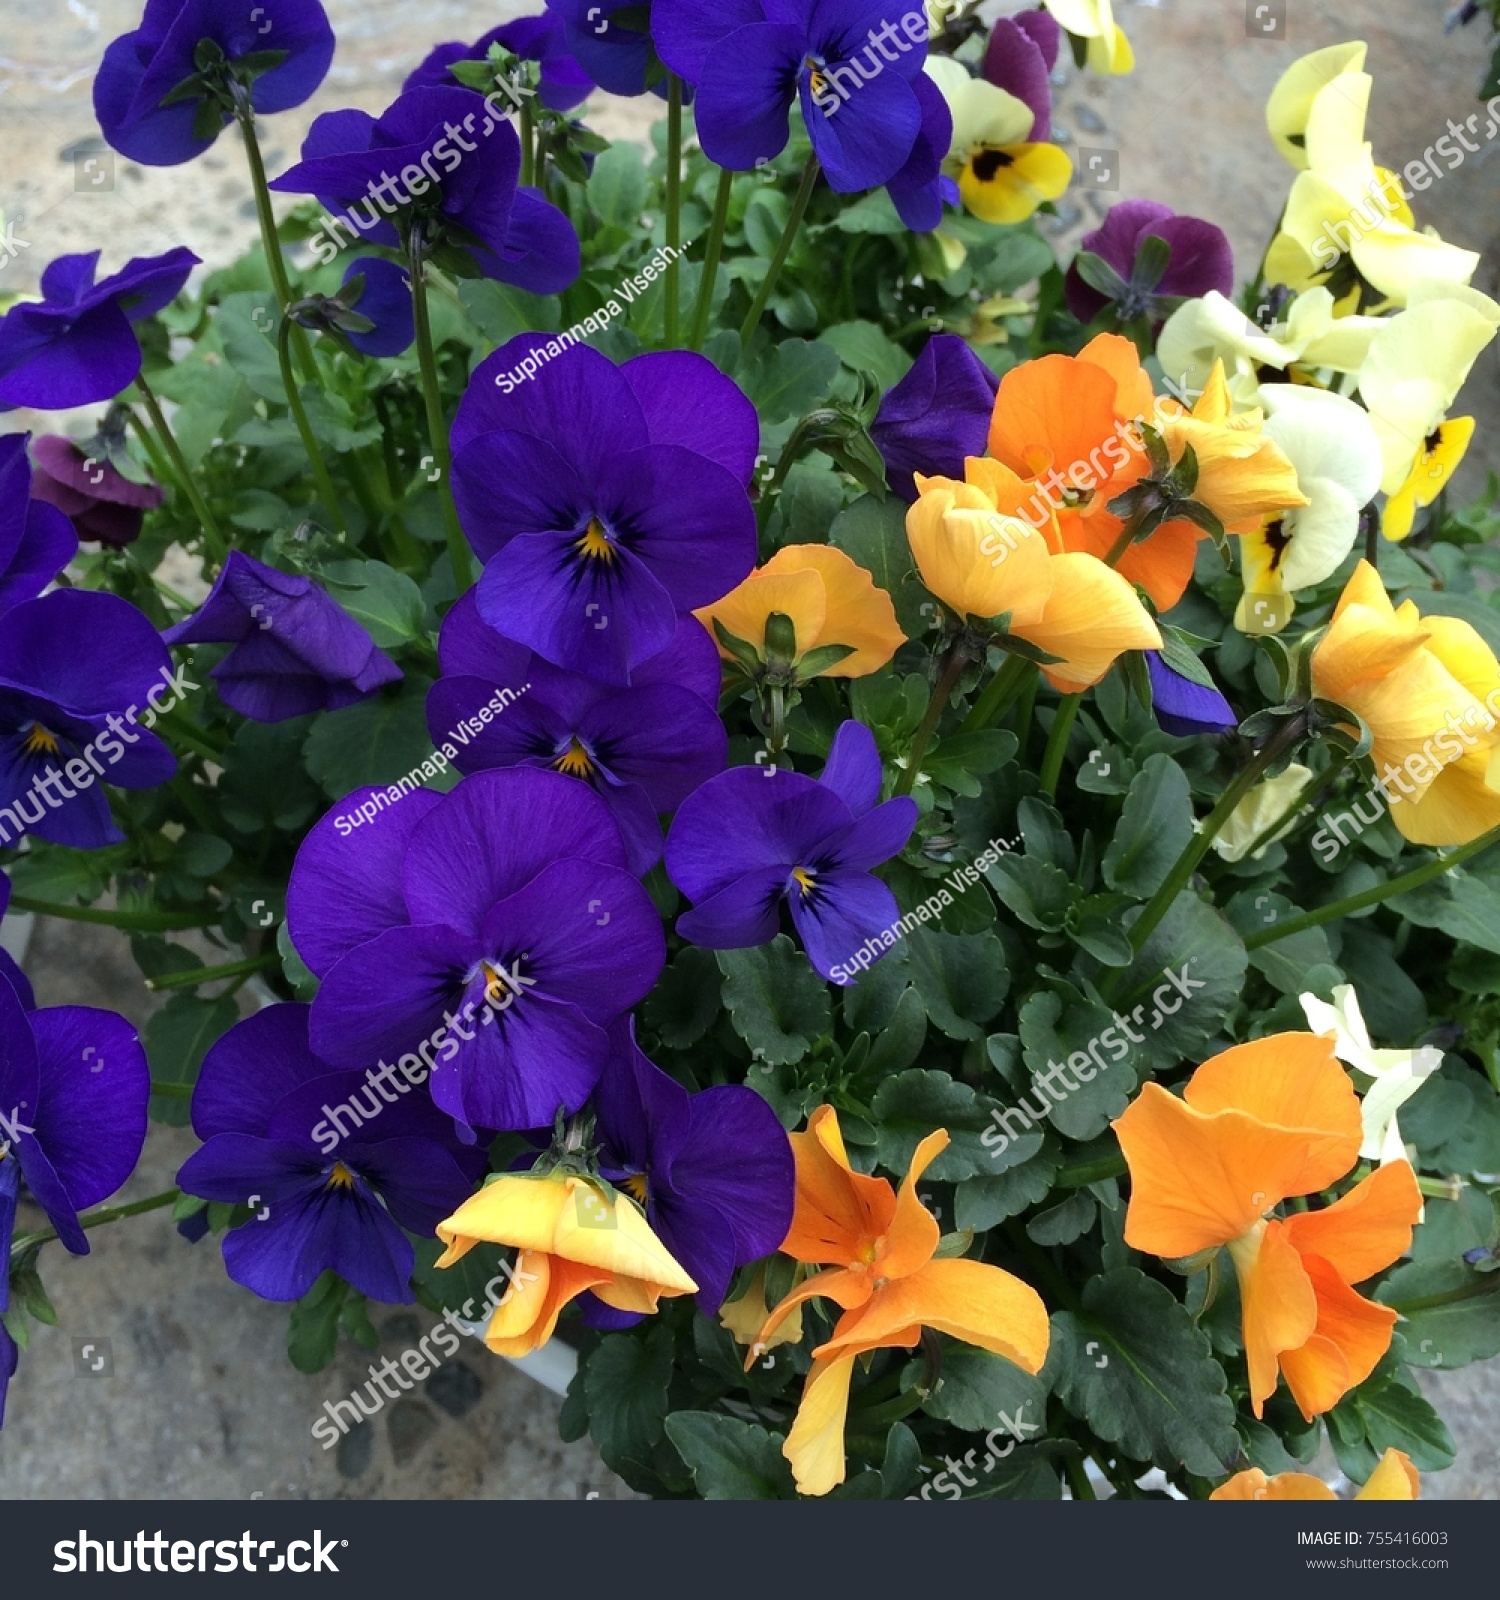 Pansies are one of the most popular and recognizable cool weather annuals. The names 'pansy' and 'viola' are often used interchangeably. #755416003